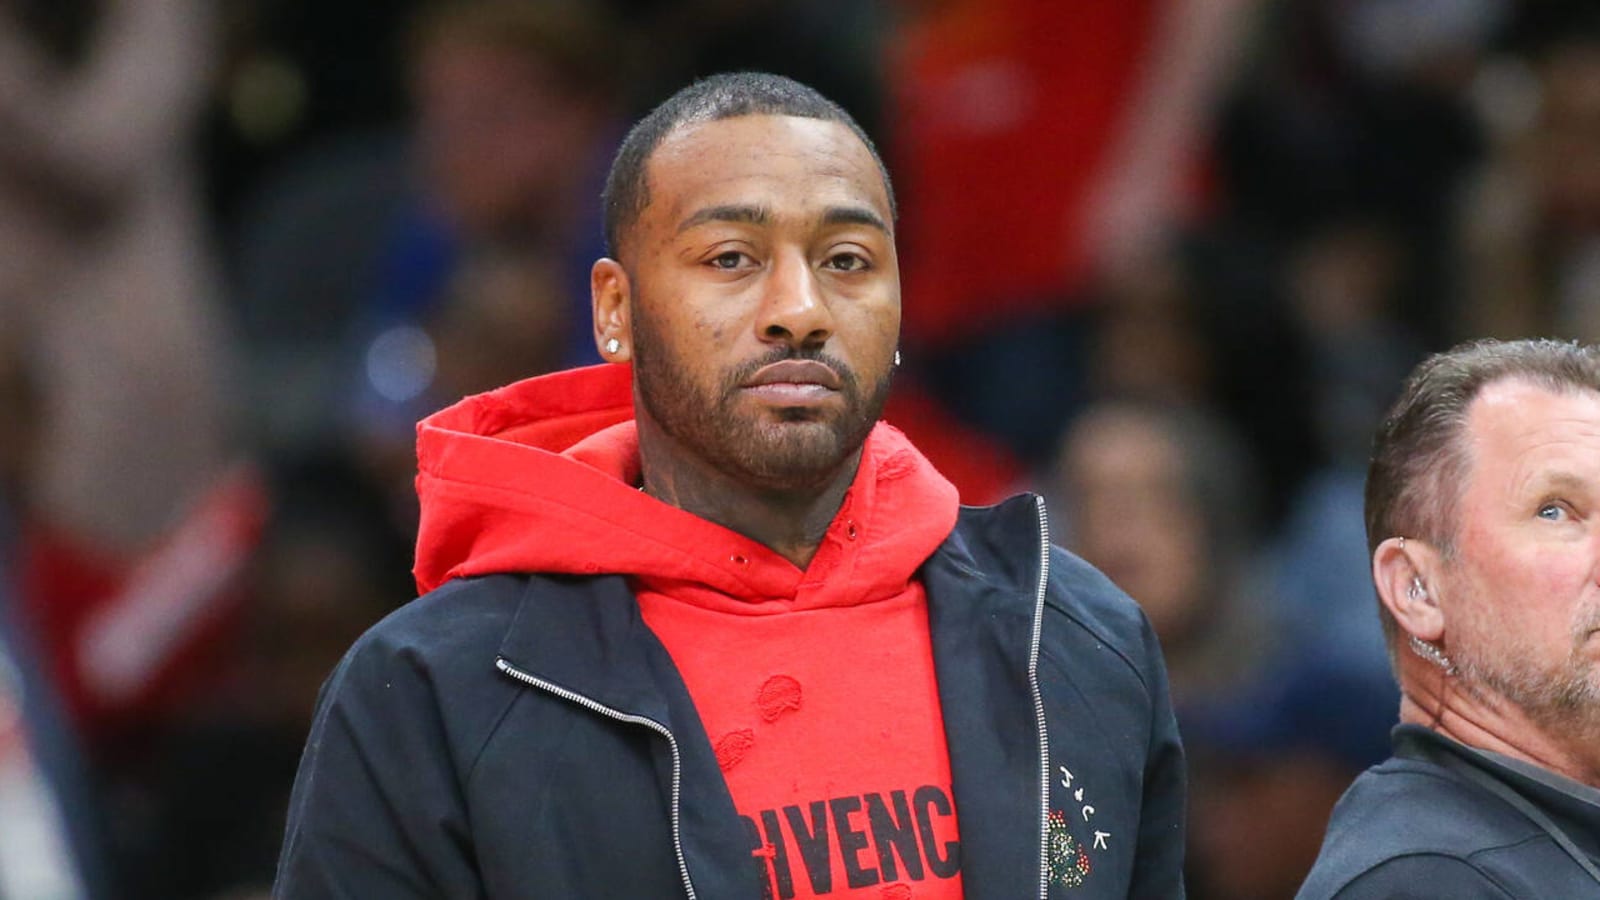 NBA Fans React To John Wall Bumping Into A Courtside Reporter And Running Away